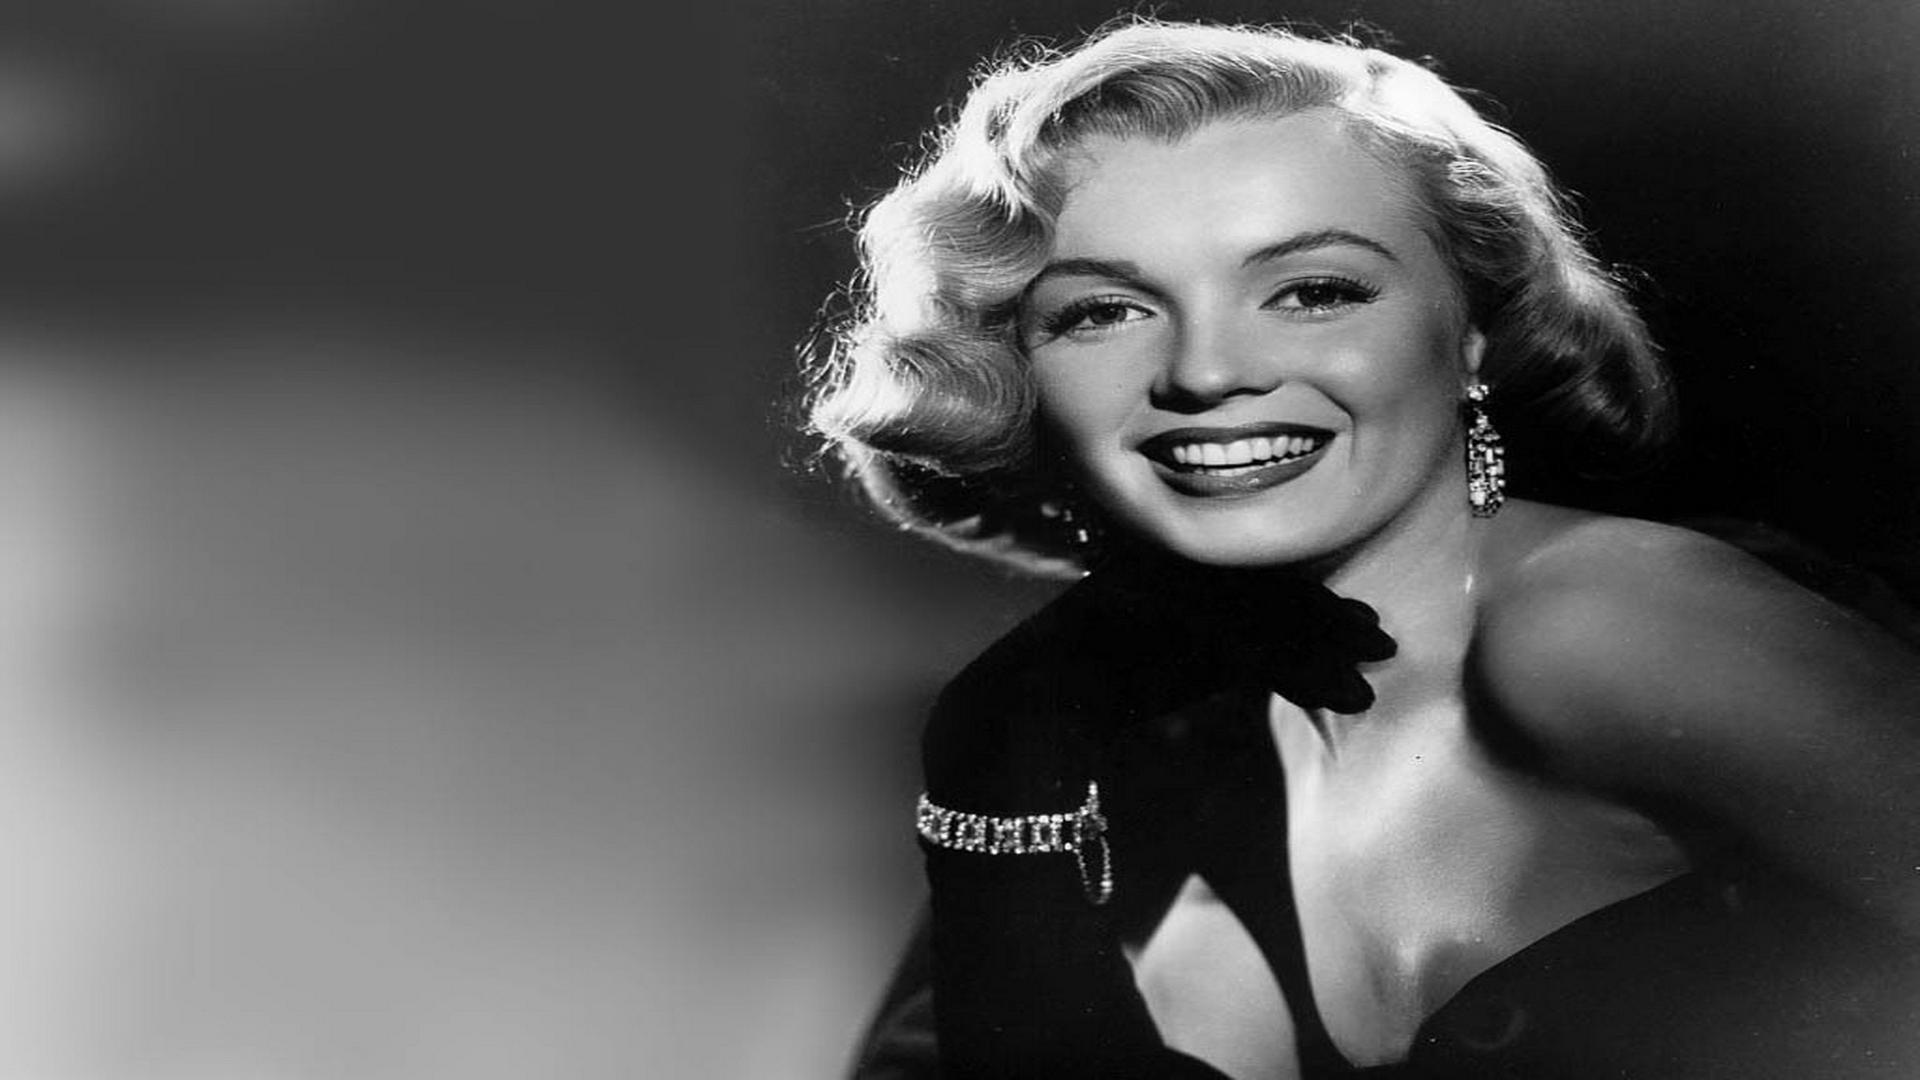 Marilyn Monroe Hd Wallpapers Pictures Auto Design Tech 1920x1080. 